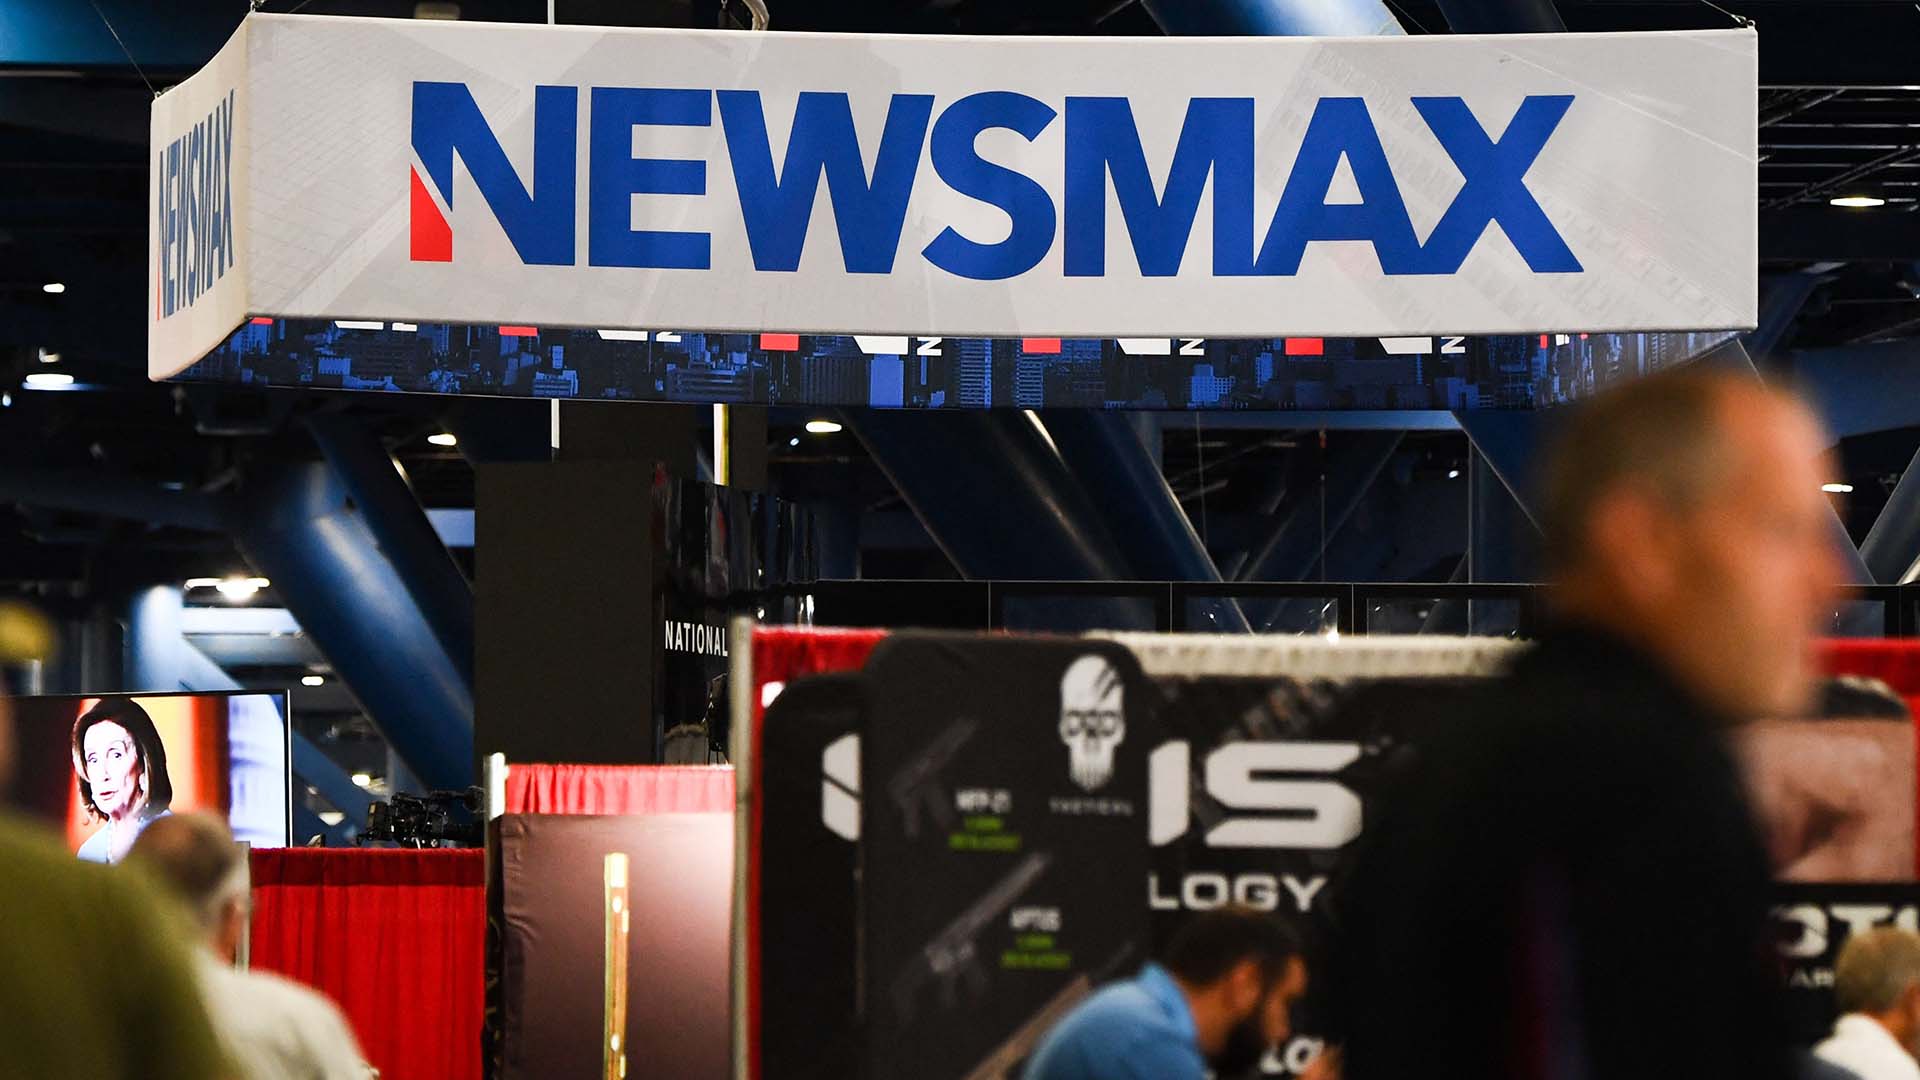 Large sign reading Newsmax above a stall inside a conference hall, with people walking past.